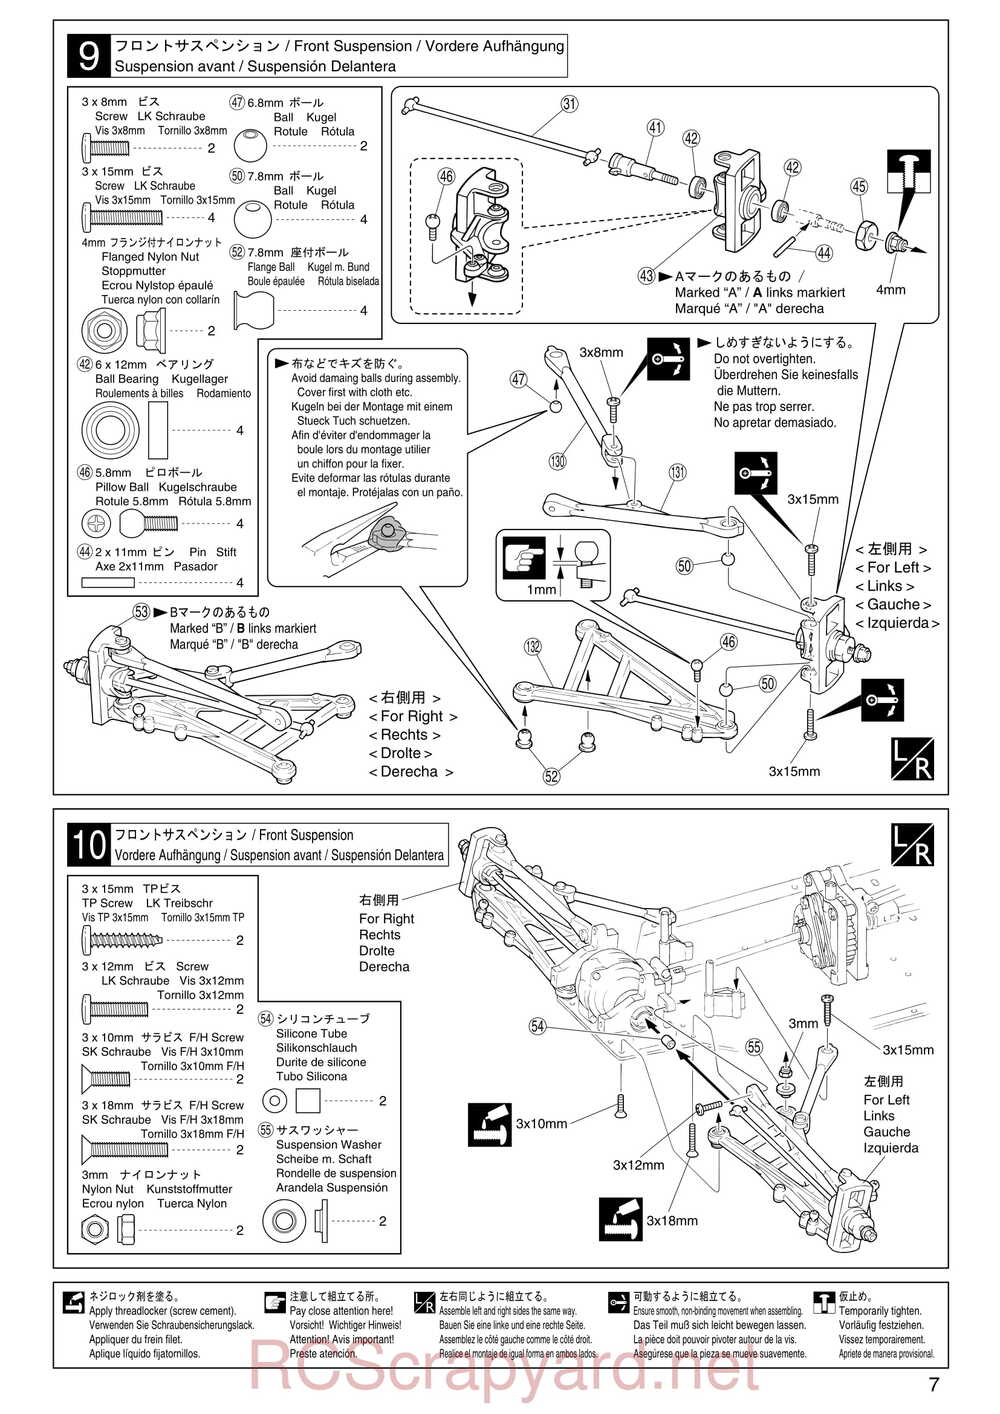 Kyosho - 31095 - TR-15 Stadium-Force - Manual - Page 07